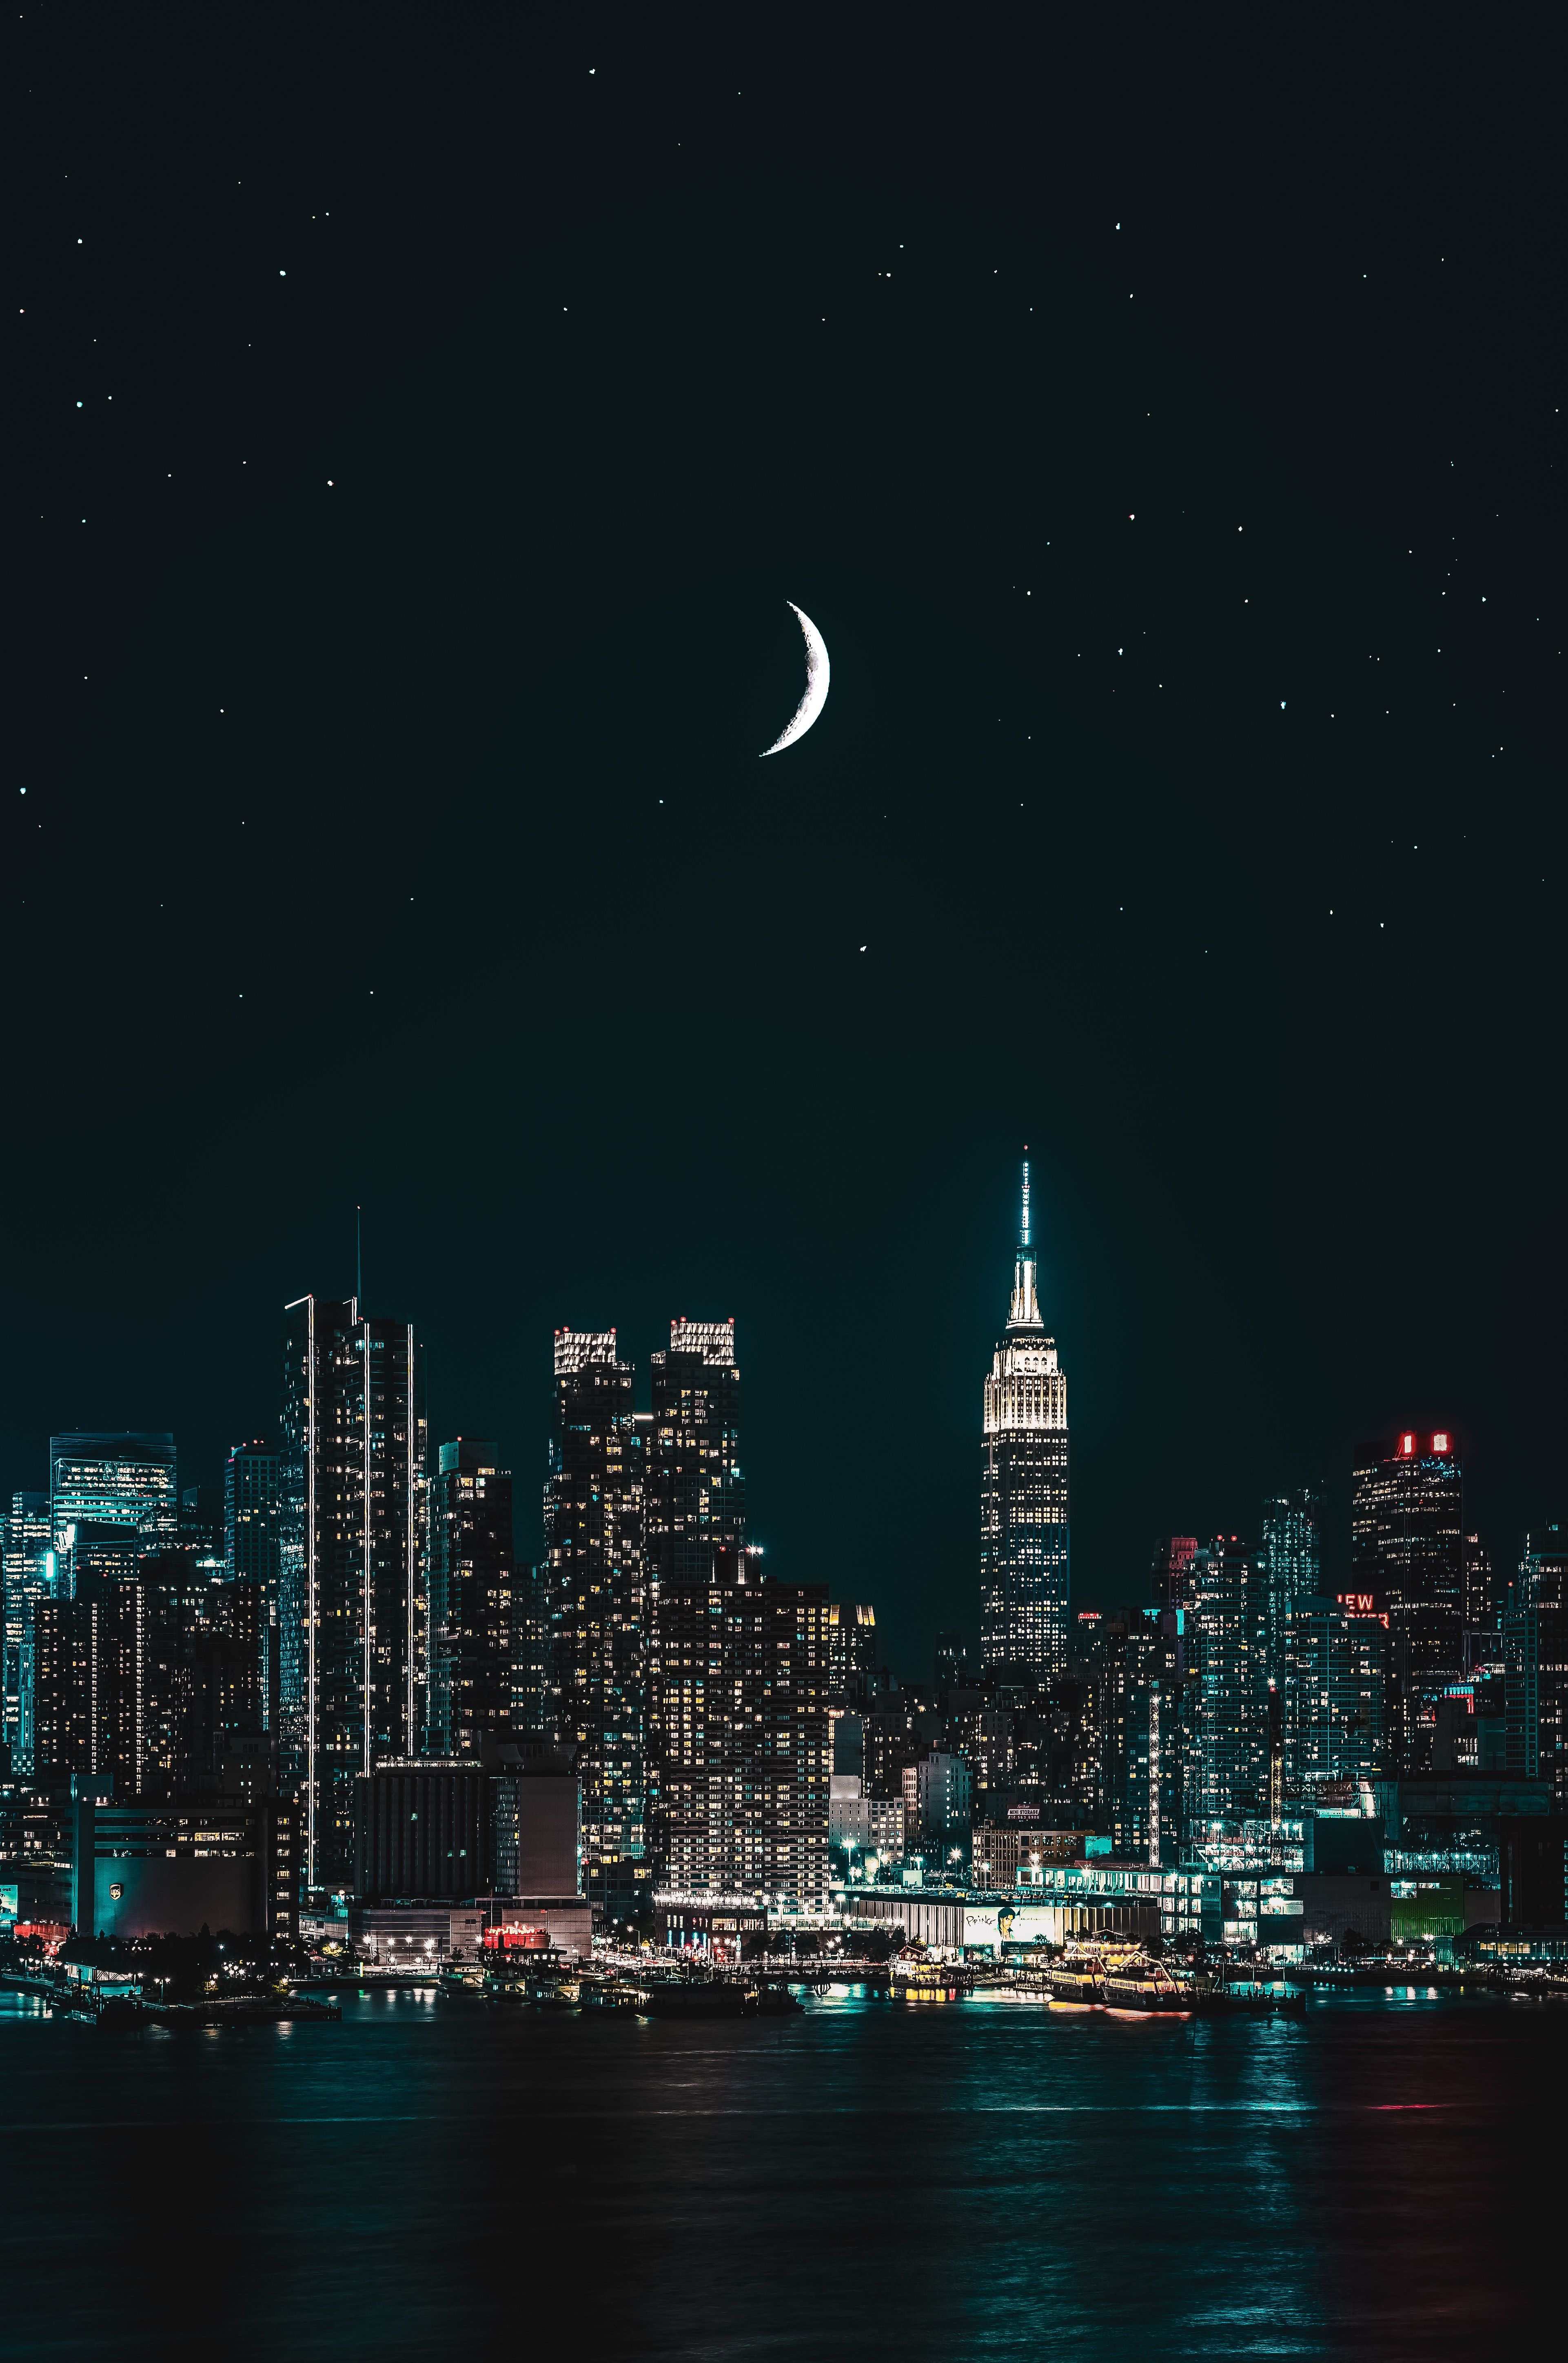 A city skyline with the moon in it - Skyline, night